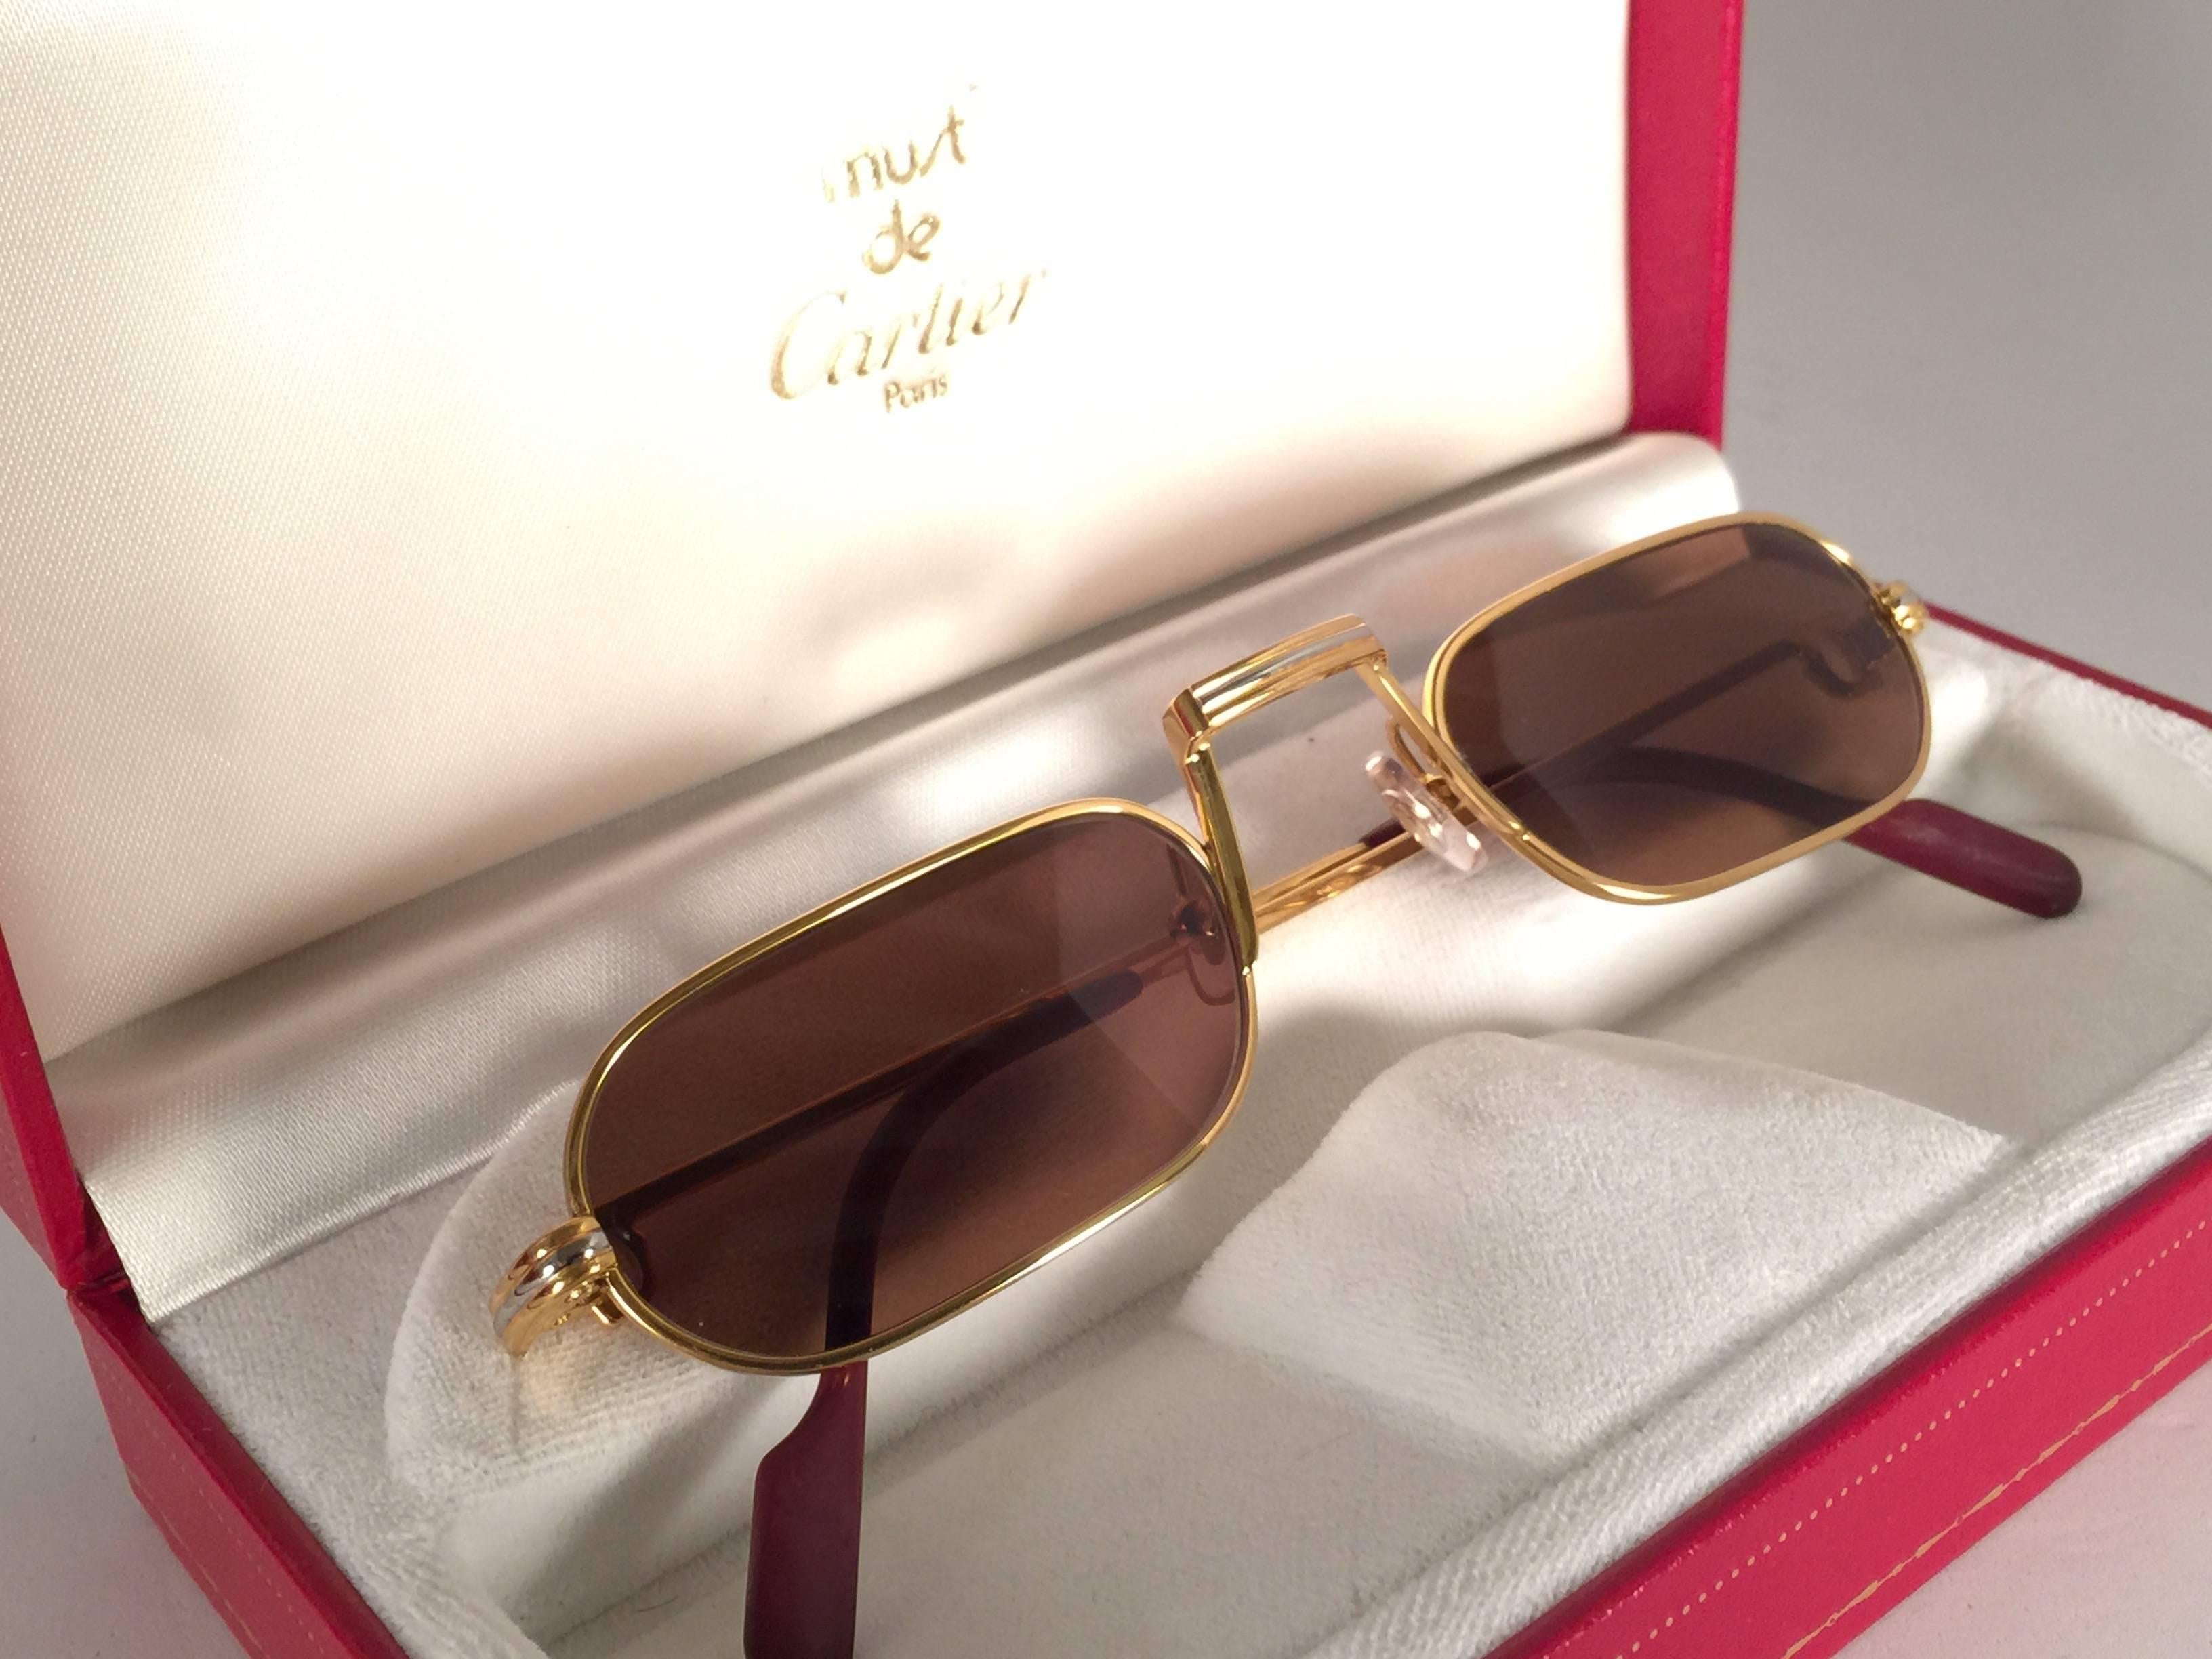 Original 1983 Cartier Demilune Cartier Vendome sunglasses with new honey brown lenses. Very comfortable as reading glasses. All hallmarks. Red enamel with Cartier gold signs on the burgundy ear paddles. Both arms sport the C from Cartier on the